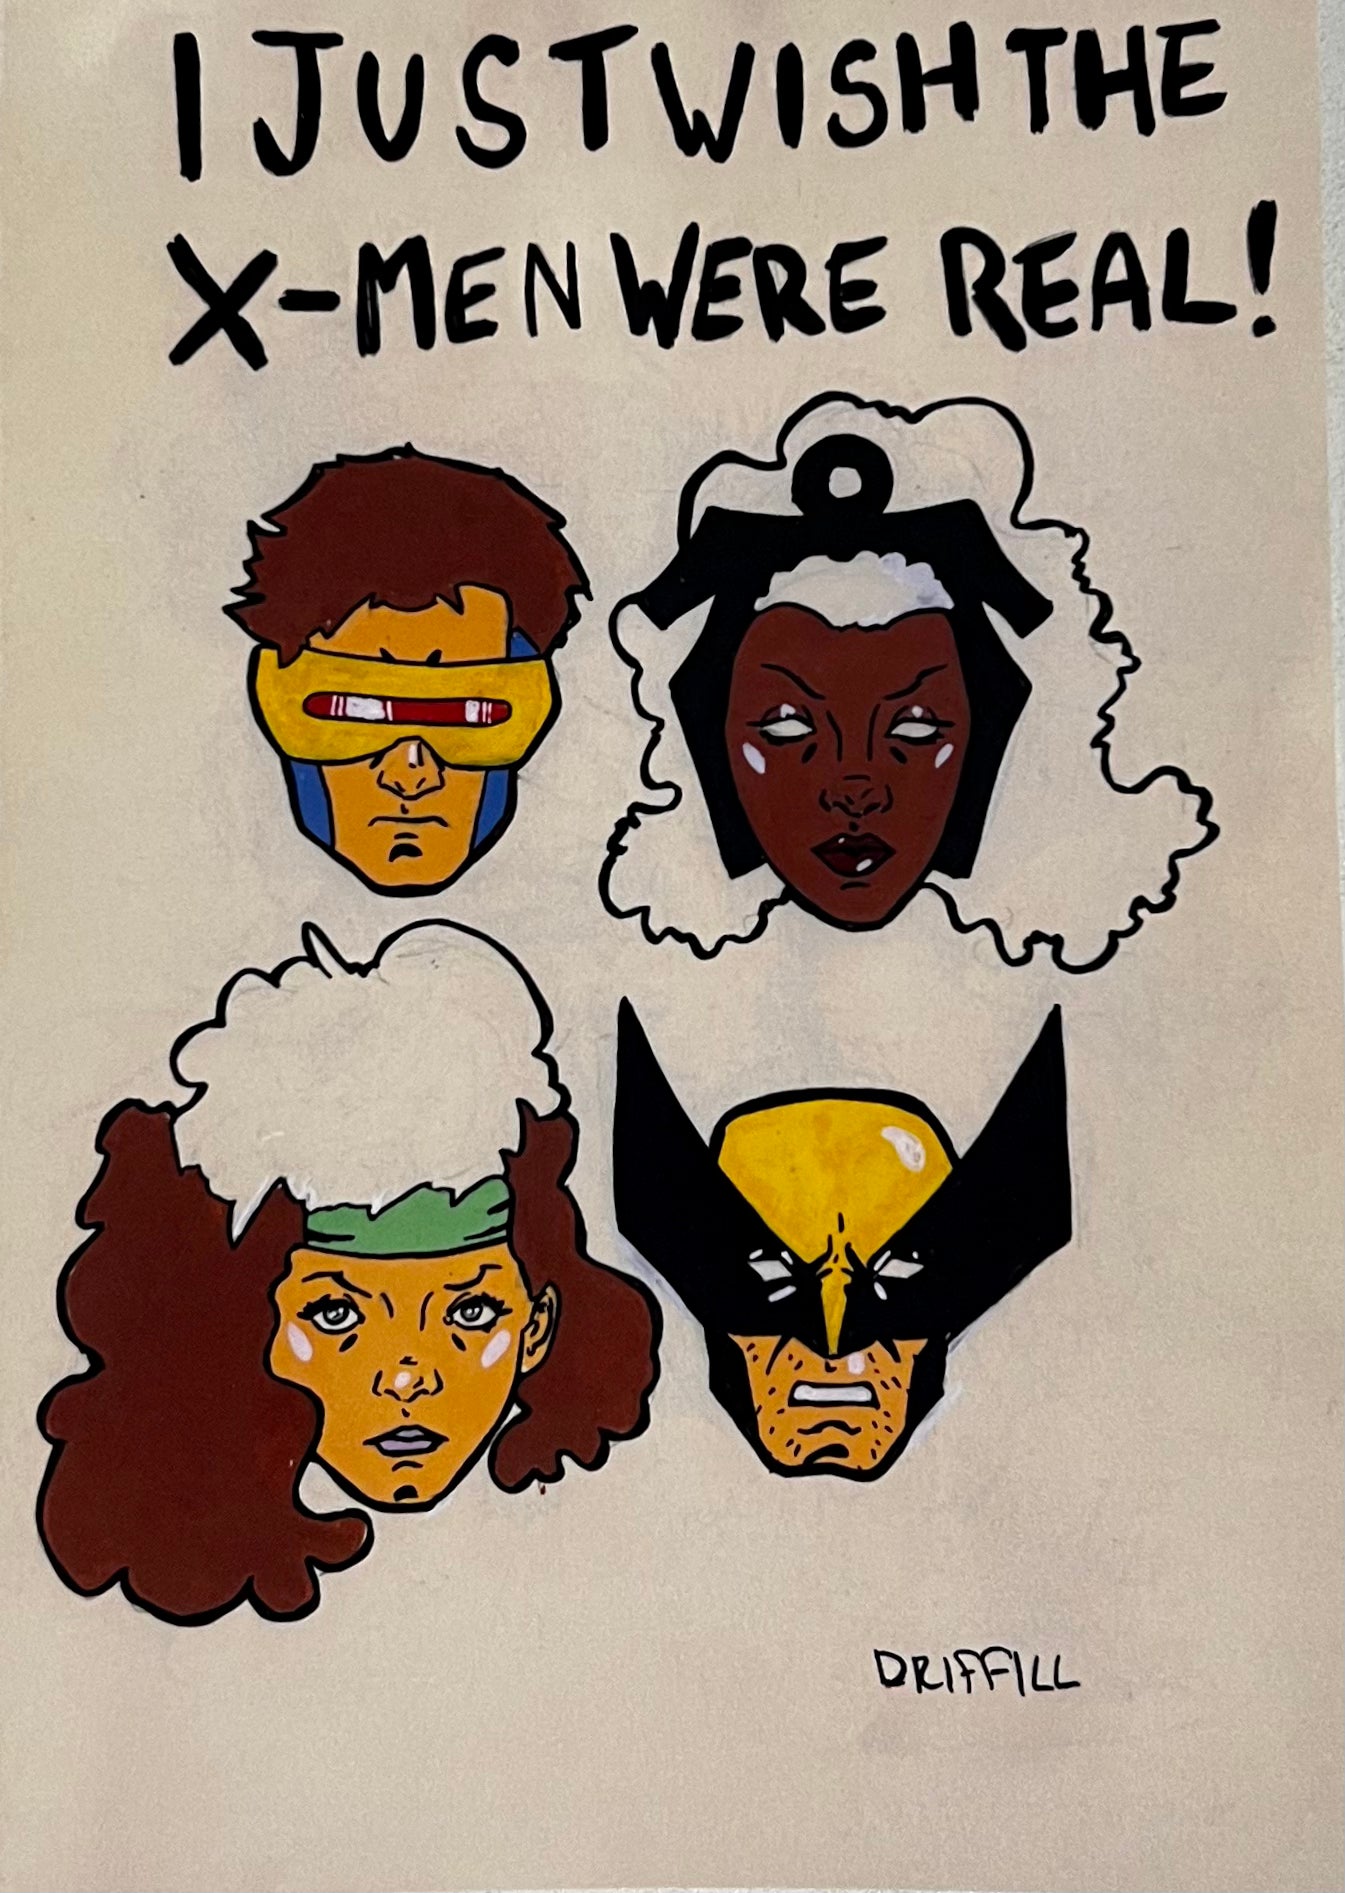 I Just Wish the X-Men Were Real!